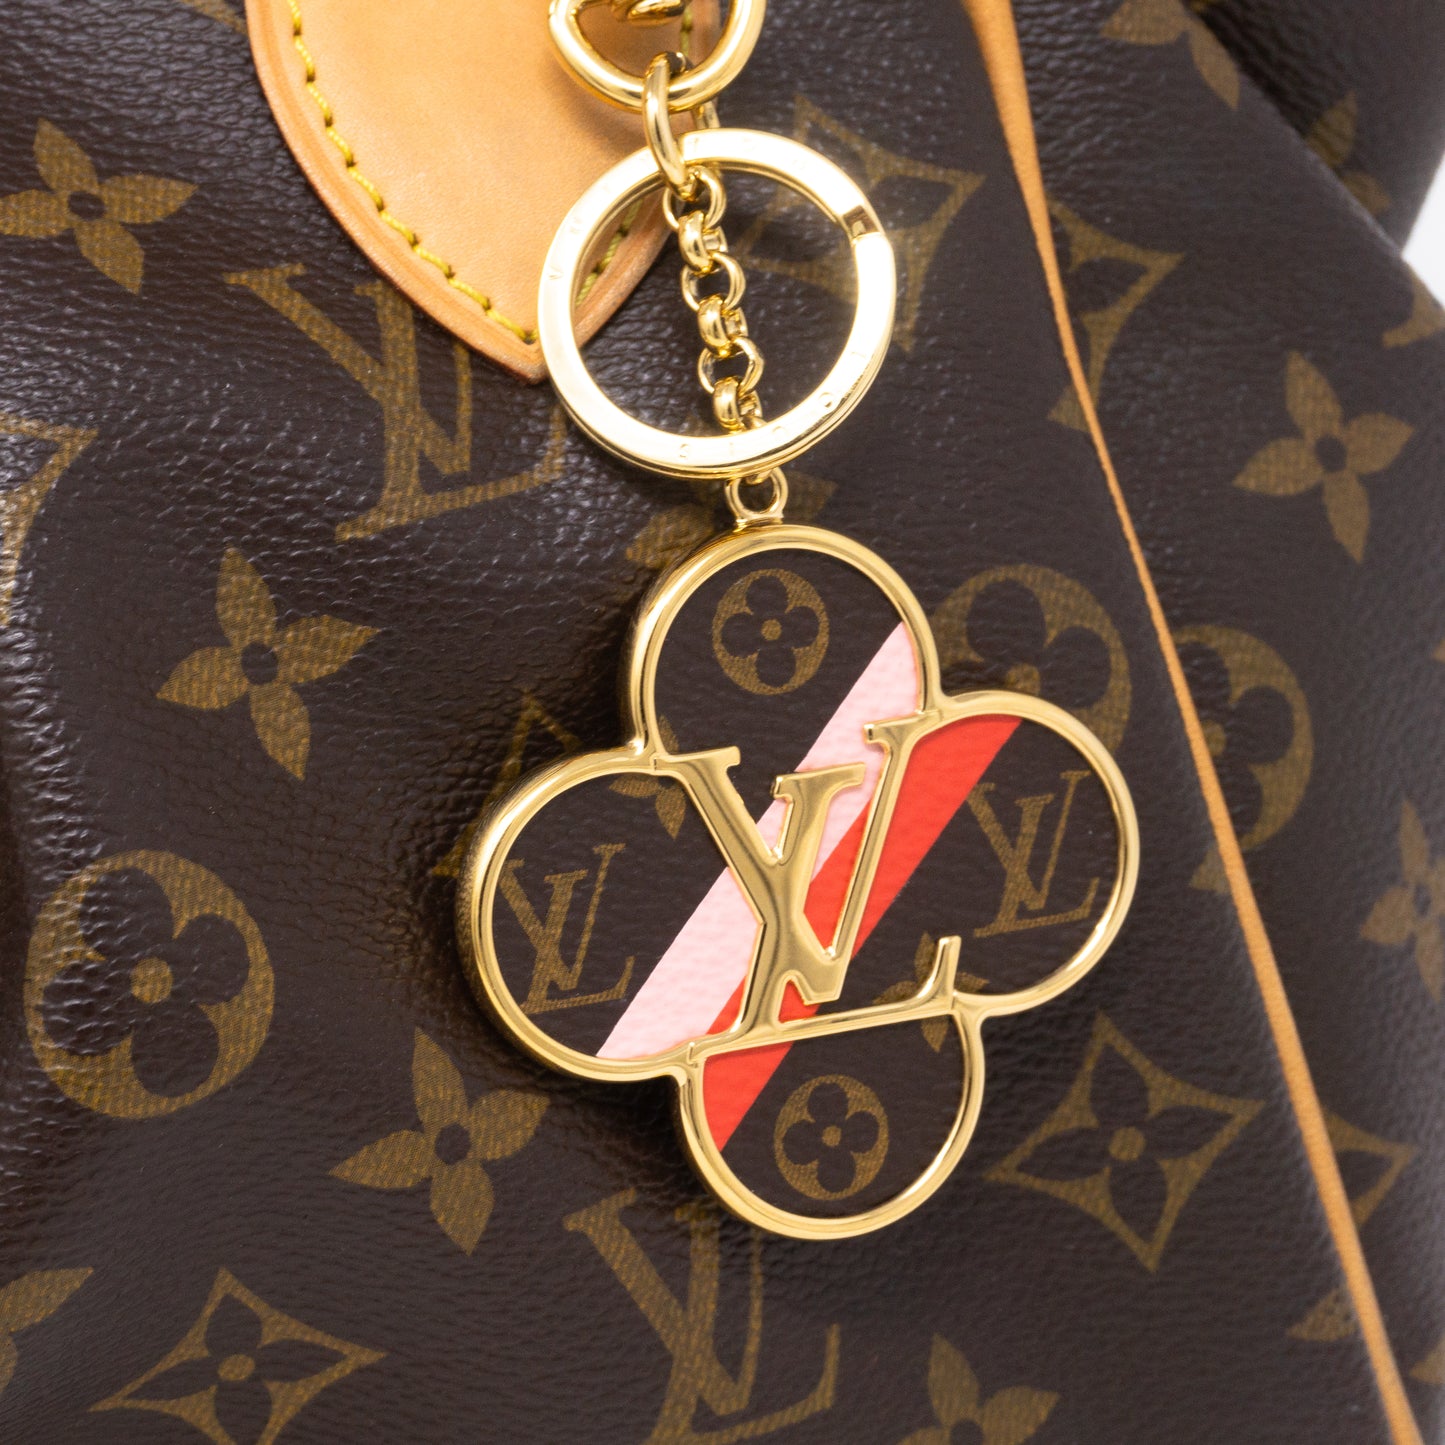 Louis Vuitton Monogram Into The Flower Key Holder and Bag Charm - Brown Bag  Accessories, Accessories - LOU795632